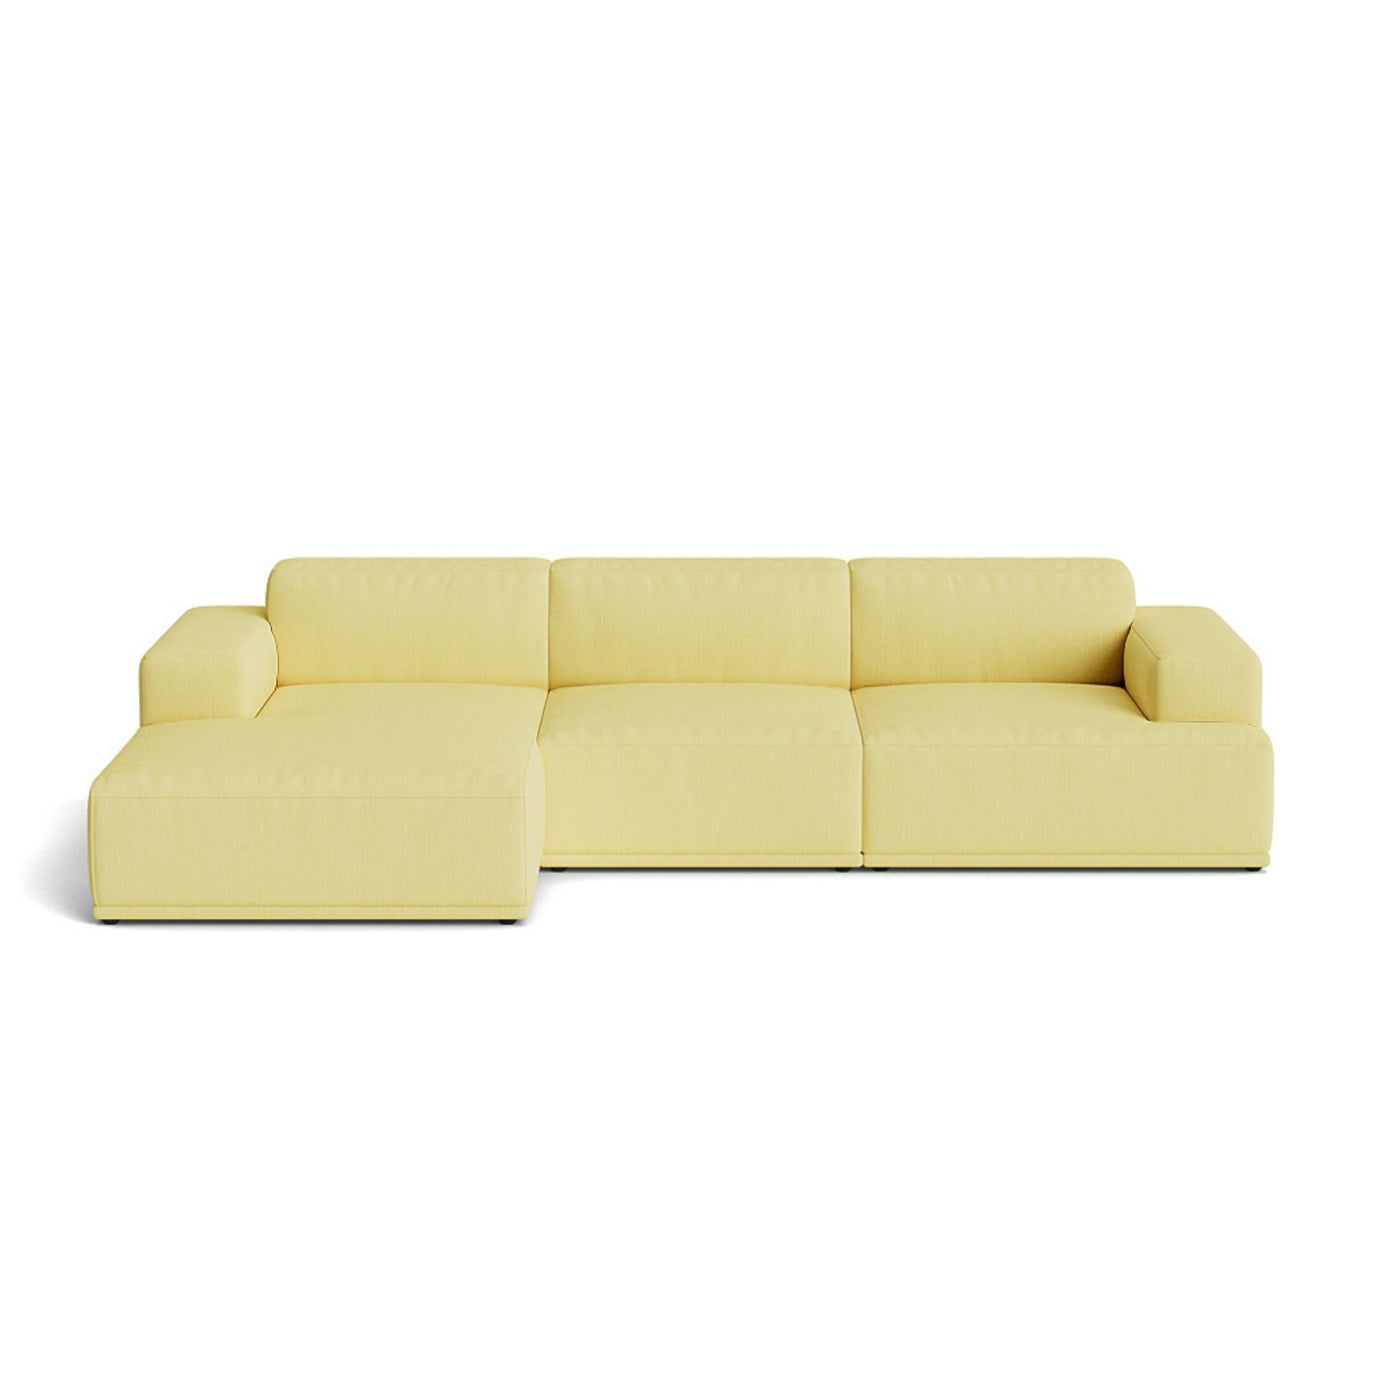 Muuto Connect Soft Modular 3 Seater Sofa, configuration 3. Made-to-order from someday designs. #colour_balder-432